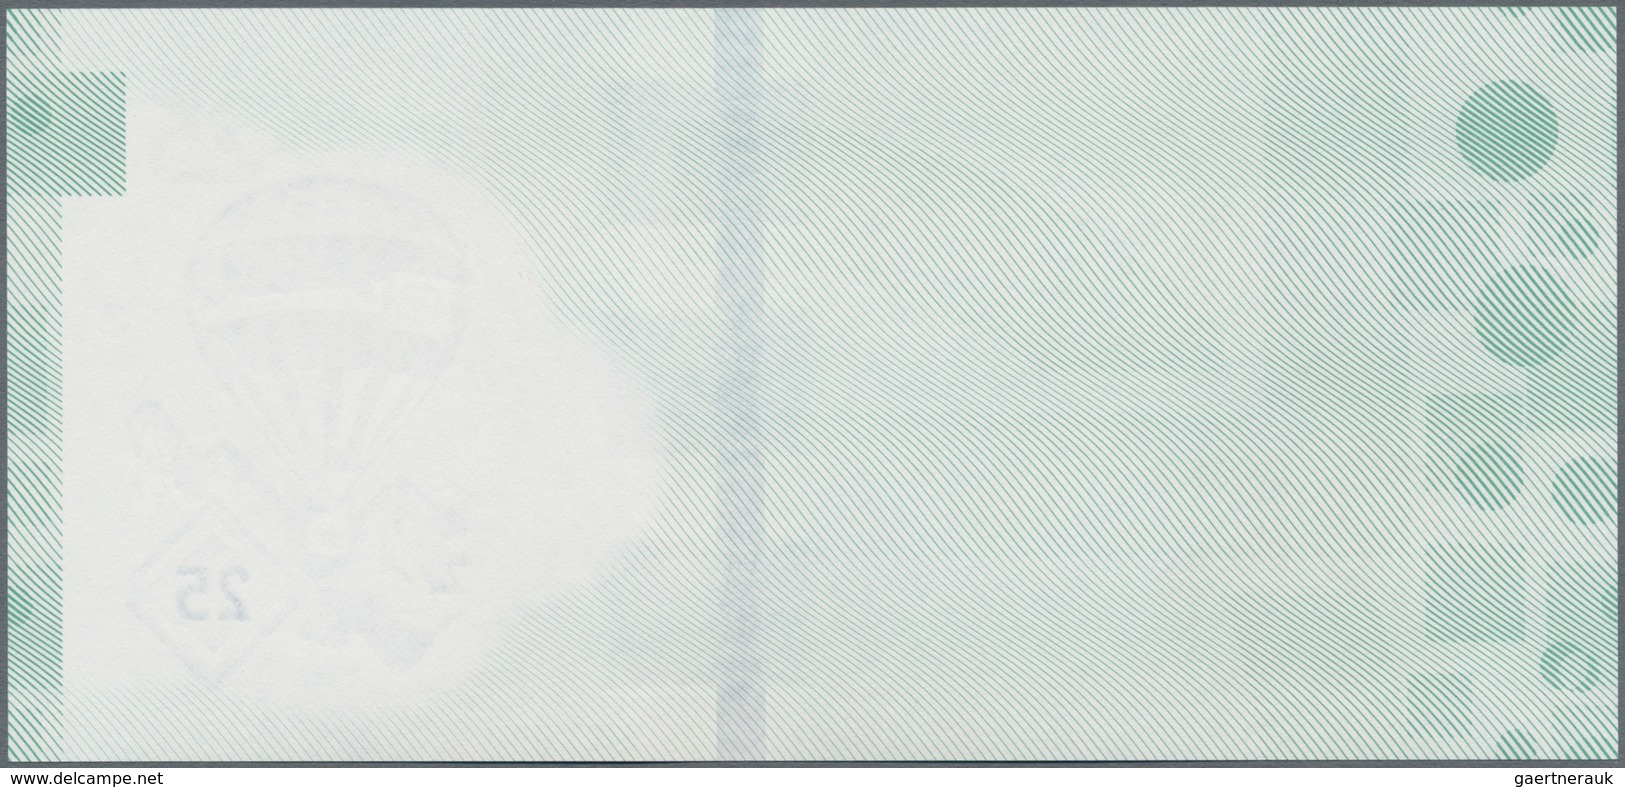 Testbanknoten: Test Note “25 Bollon” By Louisenthal, Offset Printed And Uniface Test Note With Segem - Fiktive & Specimen